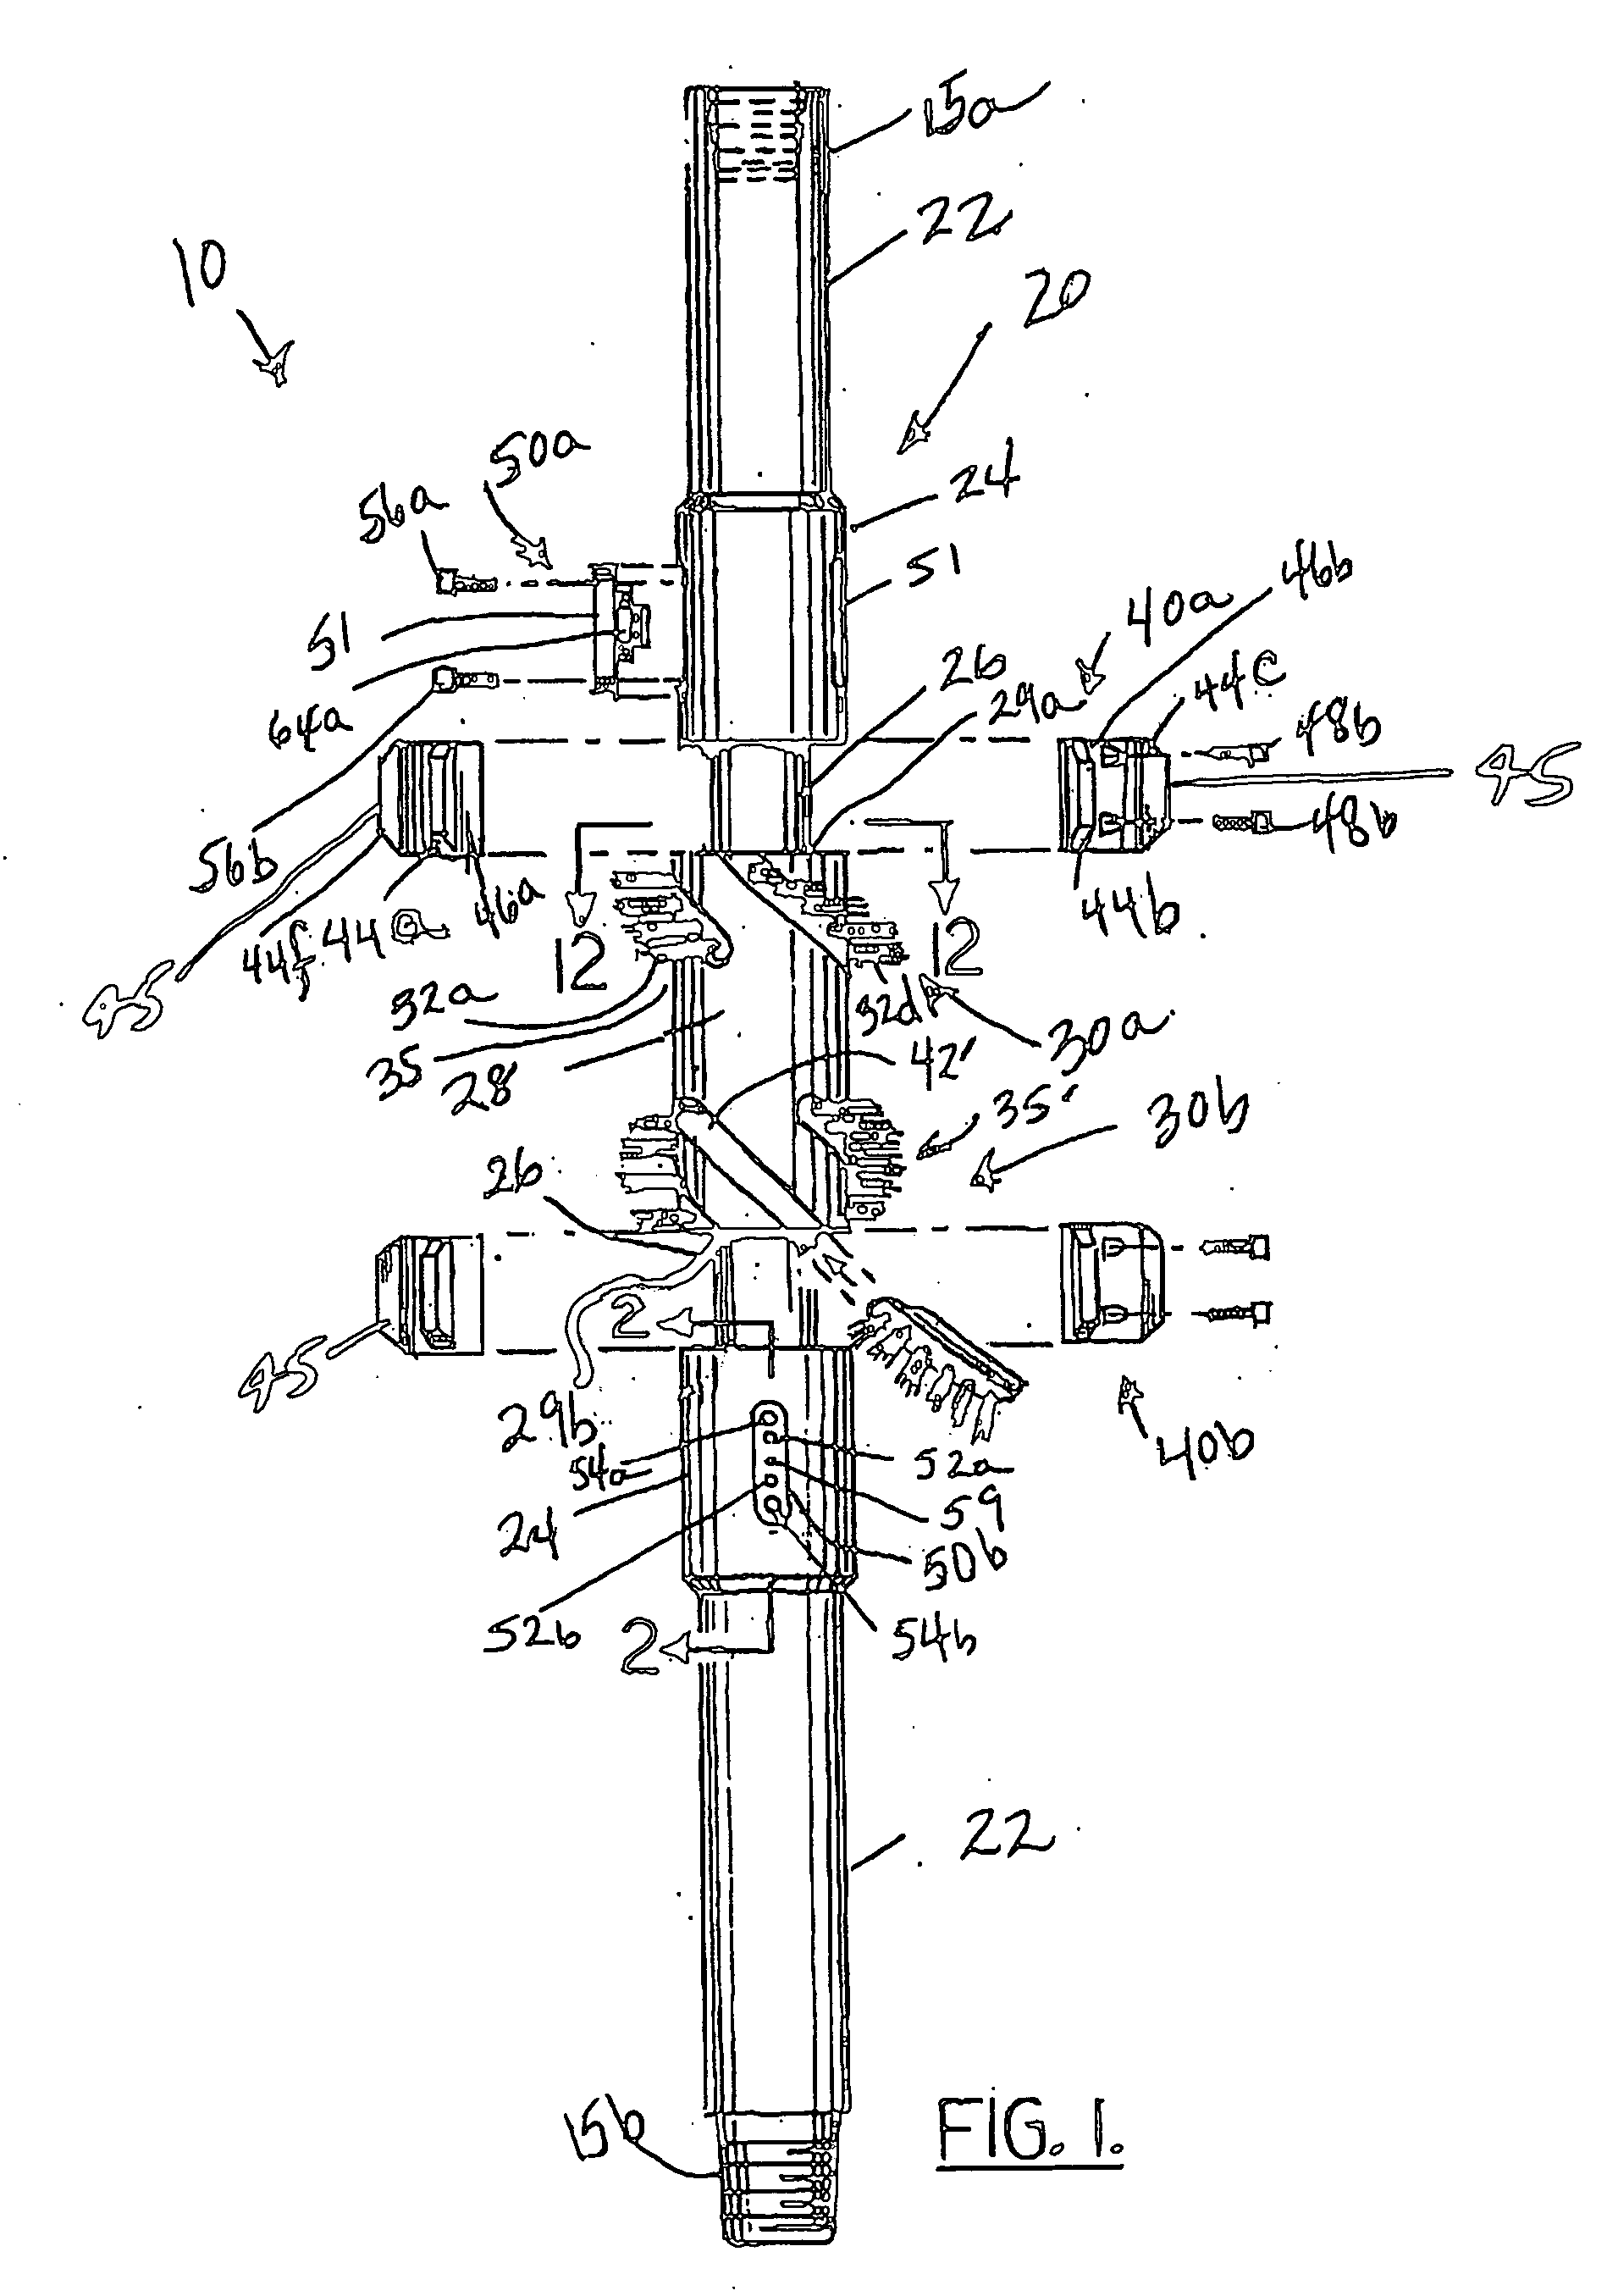 Wellbore cleaning tool system and method of use